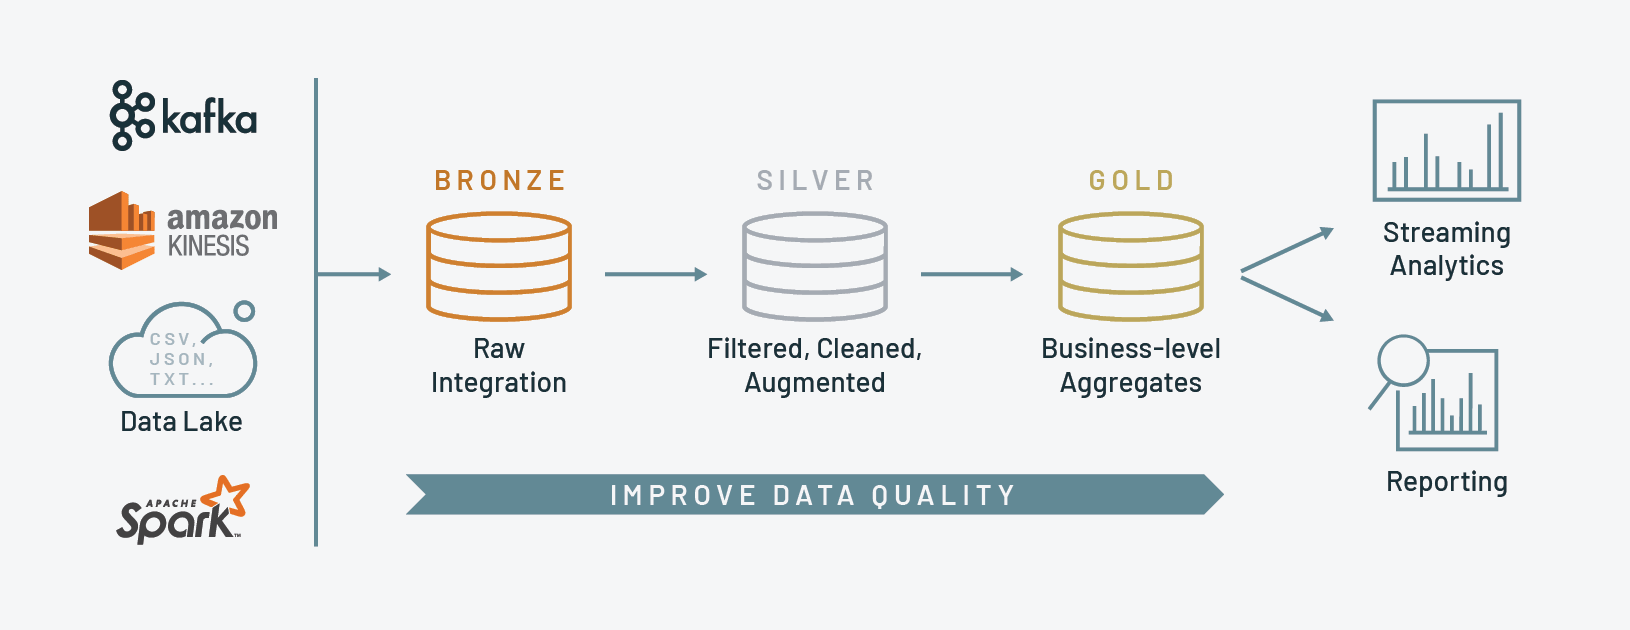 Data quality improves as it moves from left (Bronze) to right (Gold)